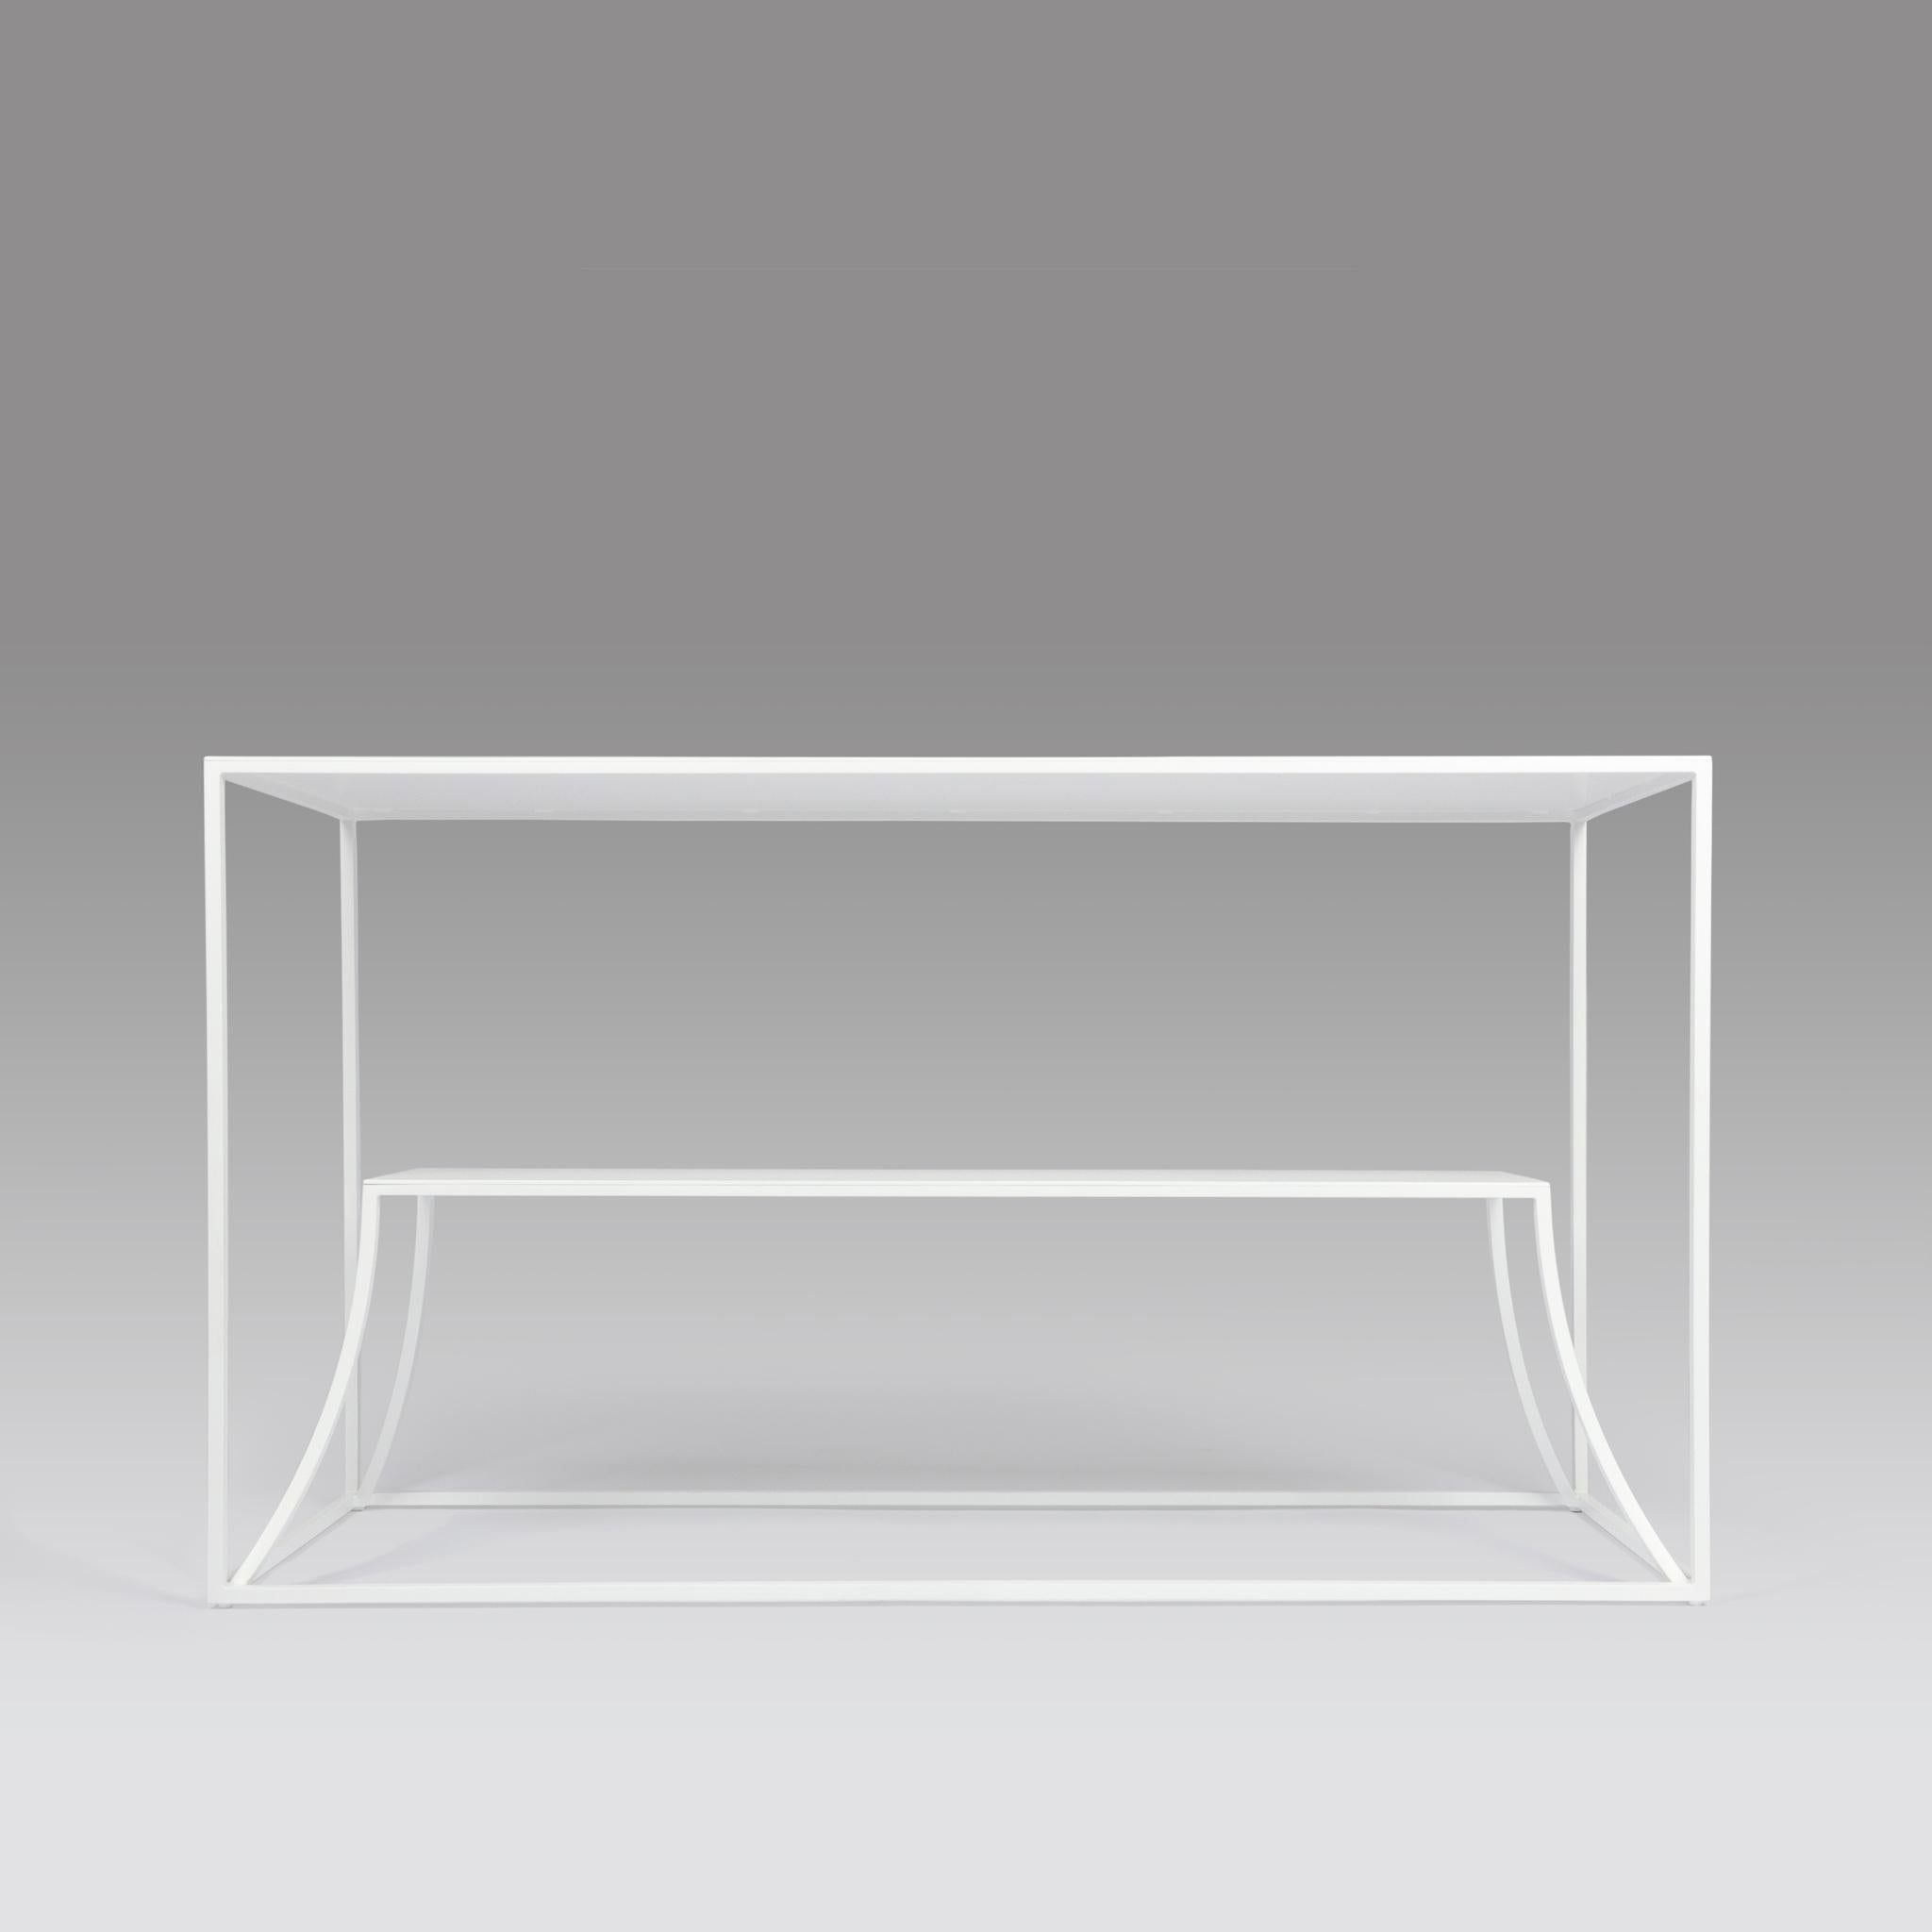 The double tier console table is a modern and sleek rectangular piece great for a foyer entrance or living room setting. The double tier feature gives it dimension and interest. The steel construction is powder coated in bright white.

(Message us